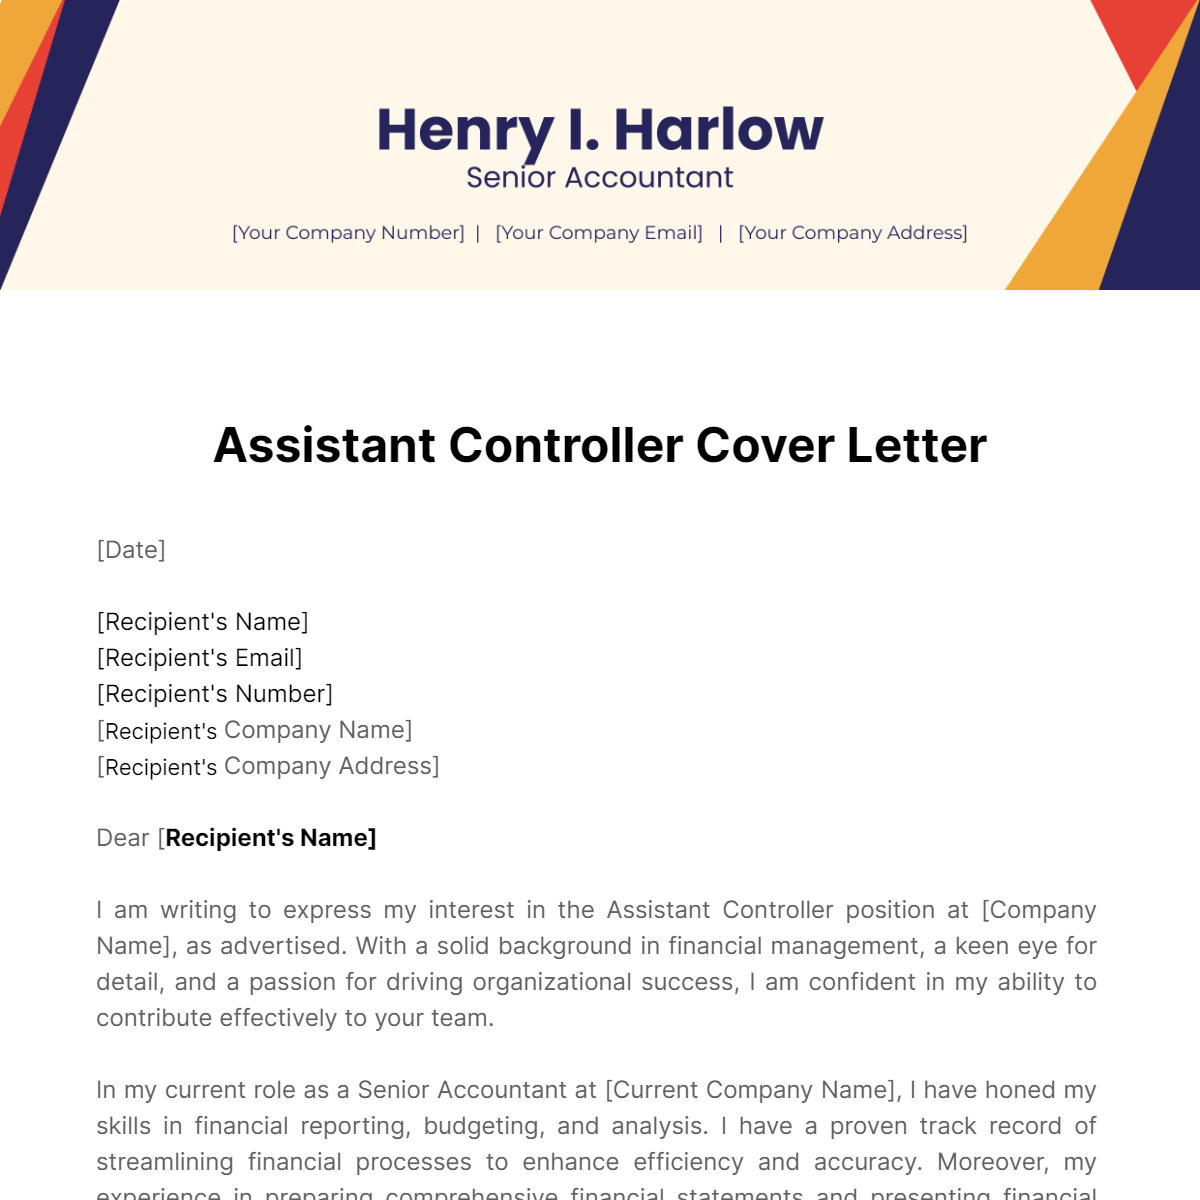 Assistant Controller Cover Letter Template